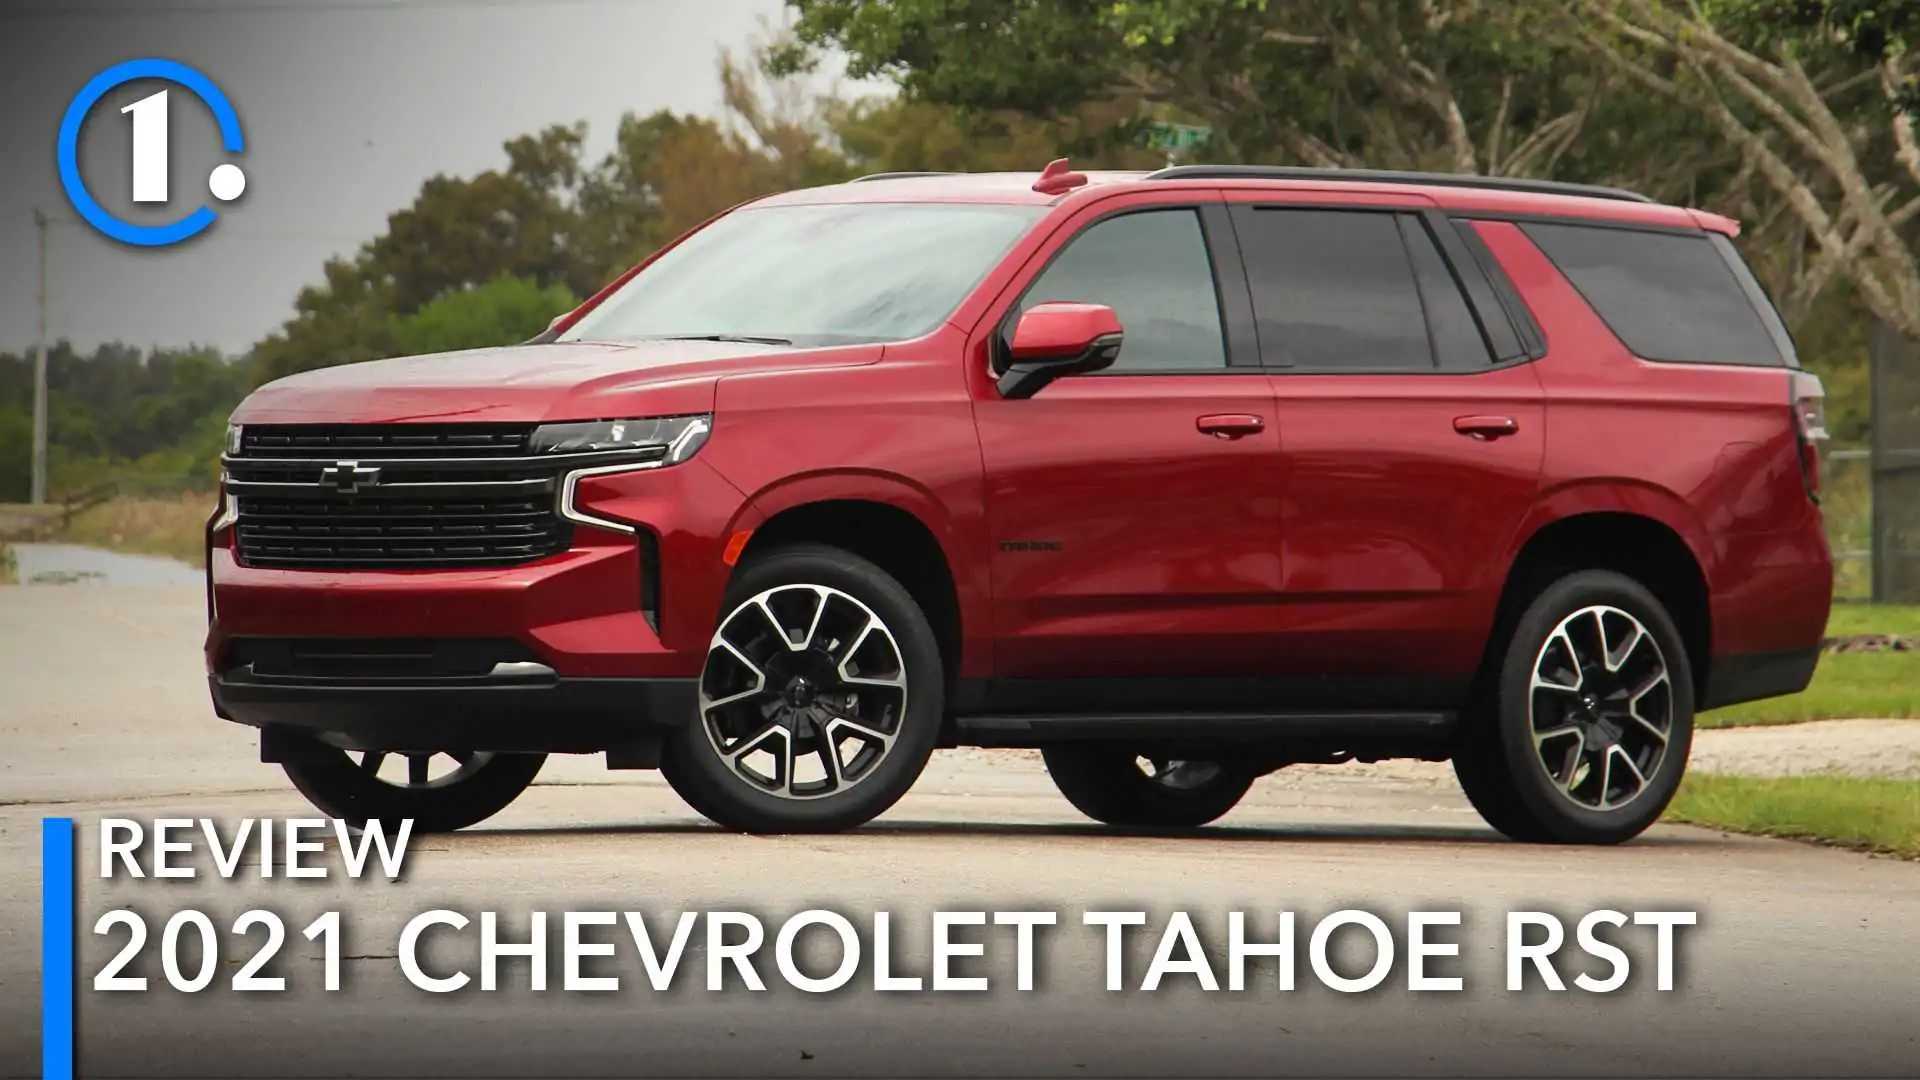 2021 Chevrolet Tahoe RST Review: Sporty Looking